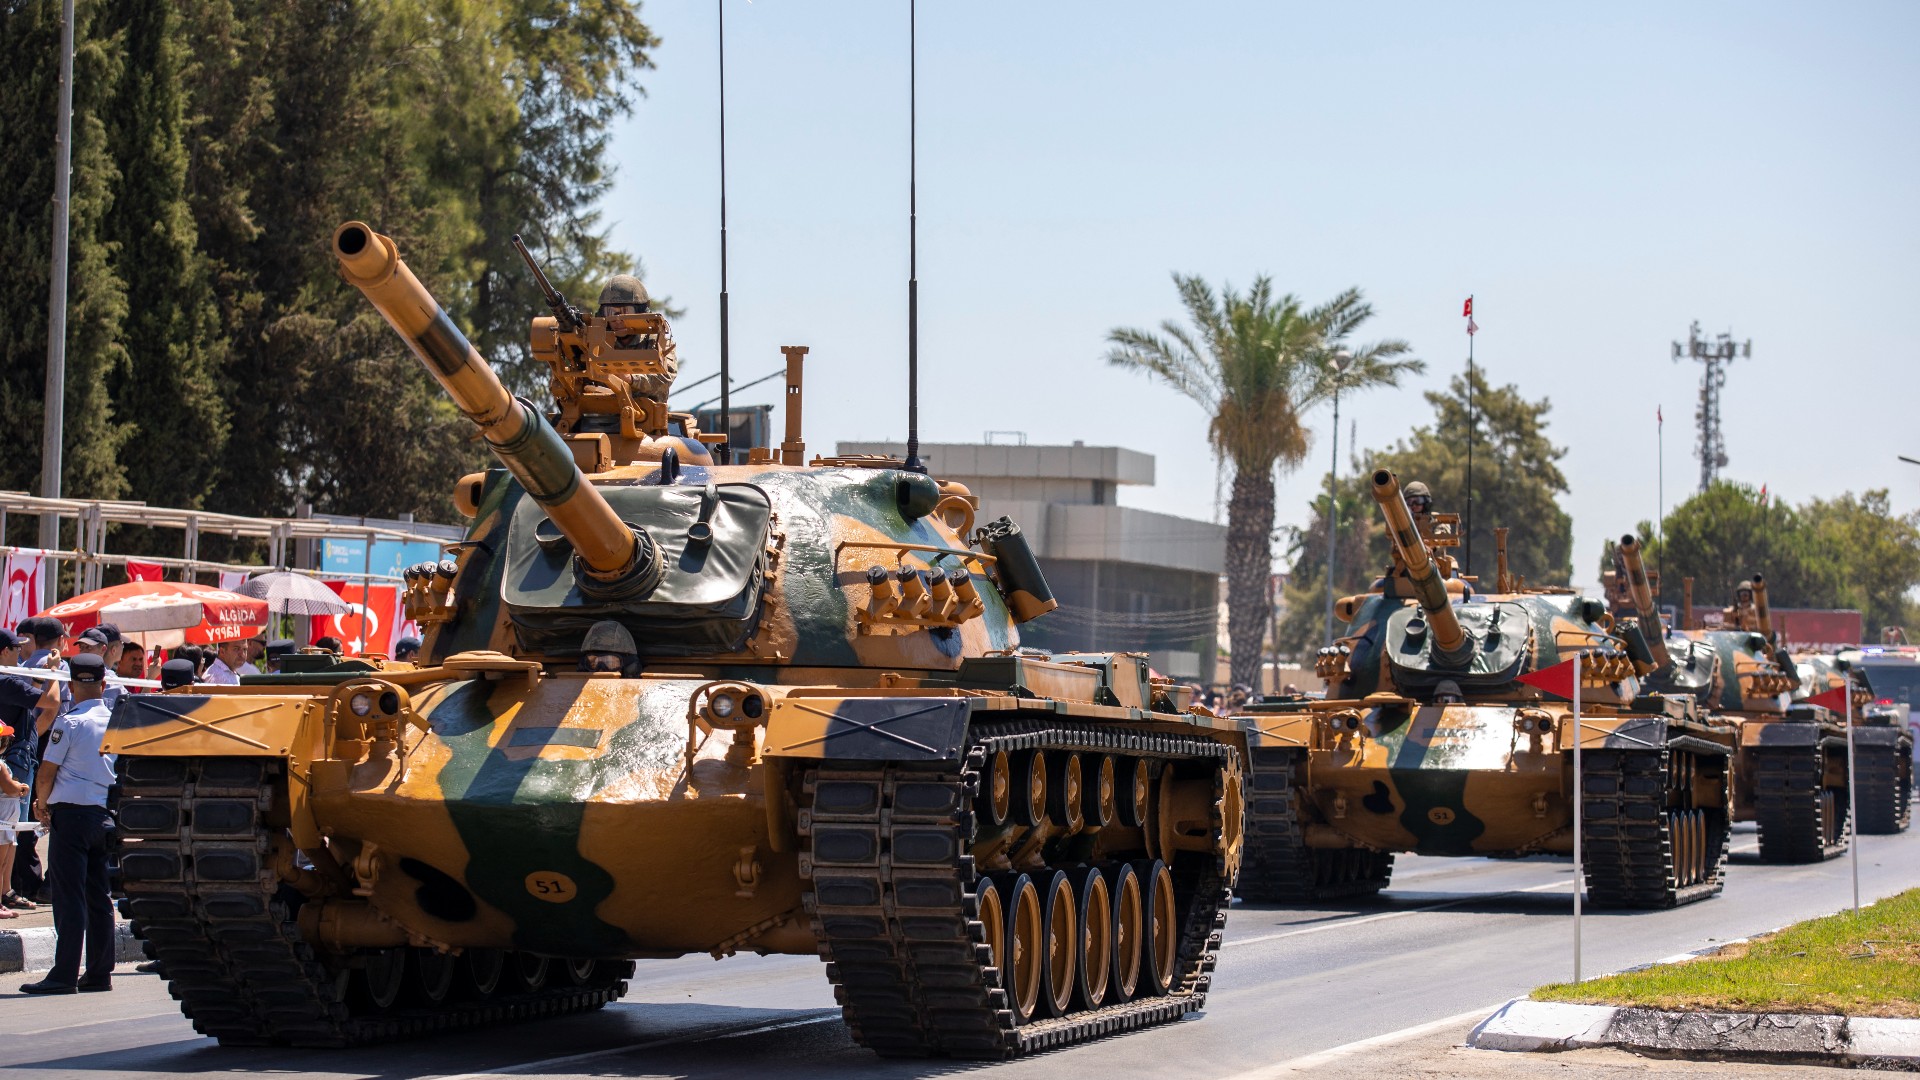 Turkish soldiers appear riding US-made M48 tanks, during an official ceremony commemorating Turkey's 1974 invasion of Cyprus (AFP/file photo)